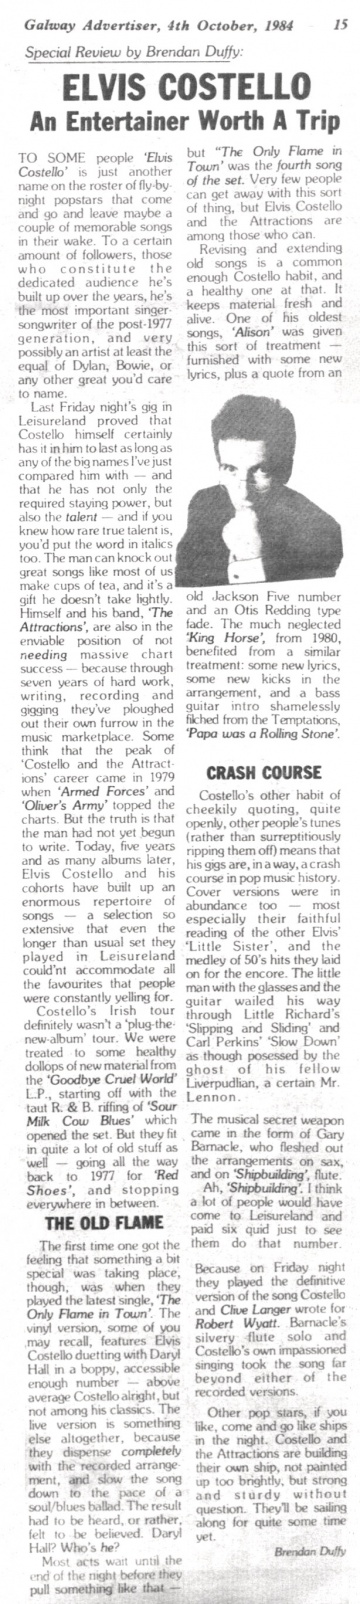 1984-10-04 Galway Advertiser page 15 clipping.jpg